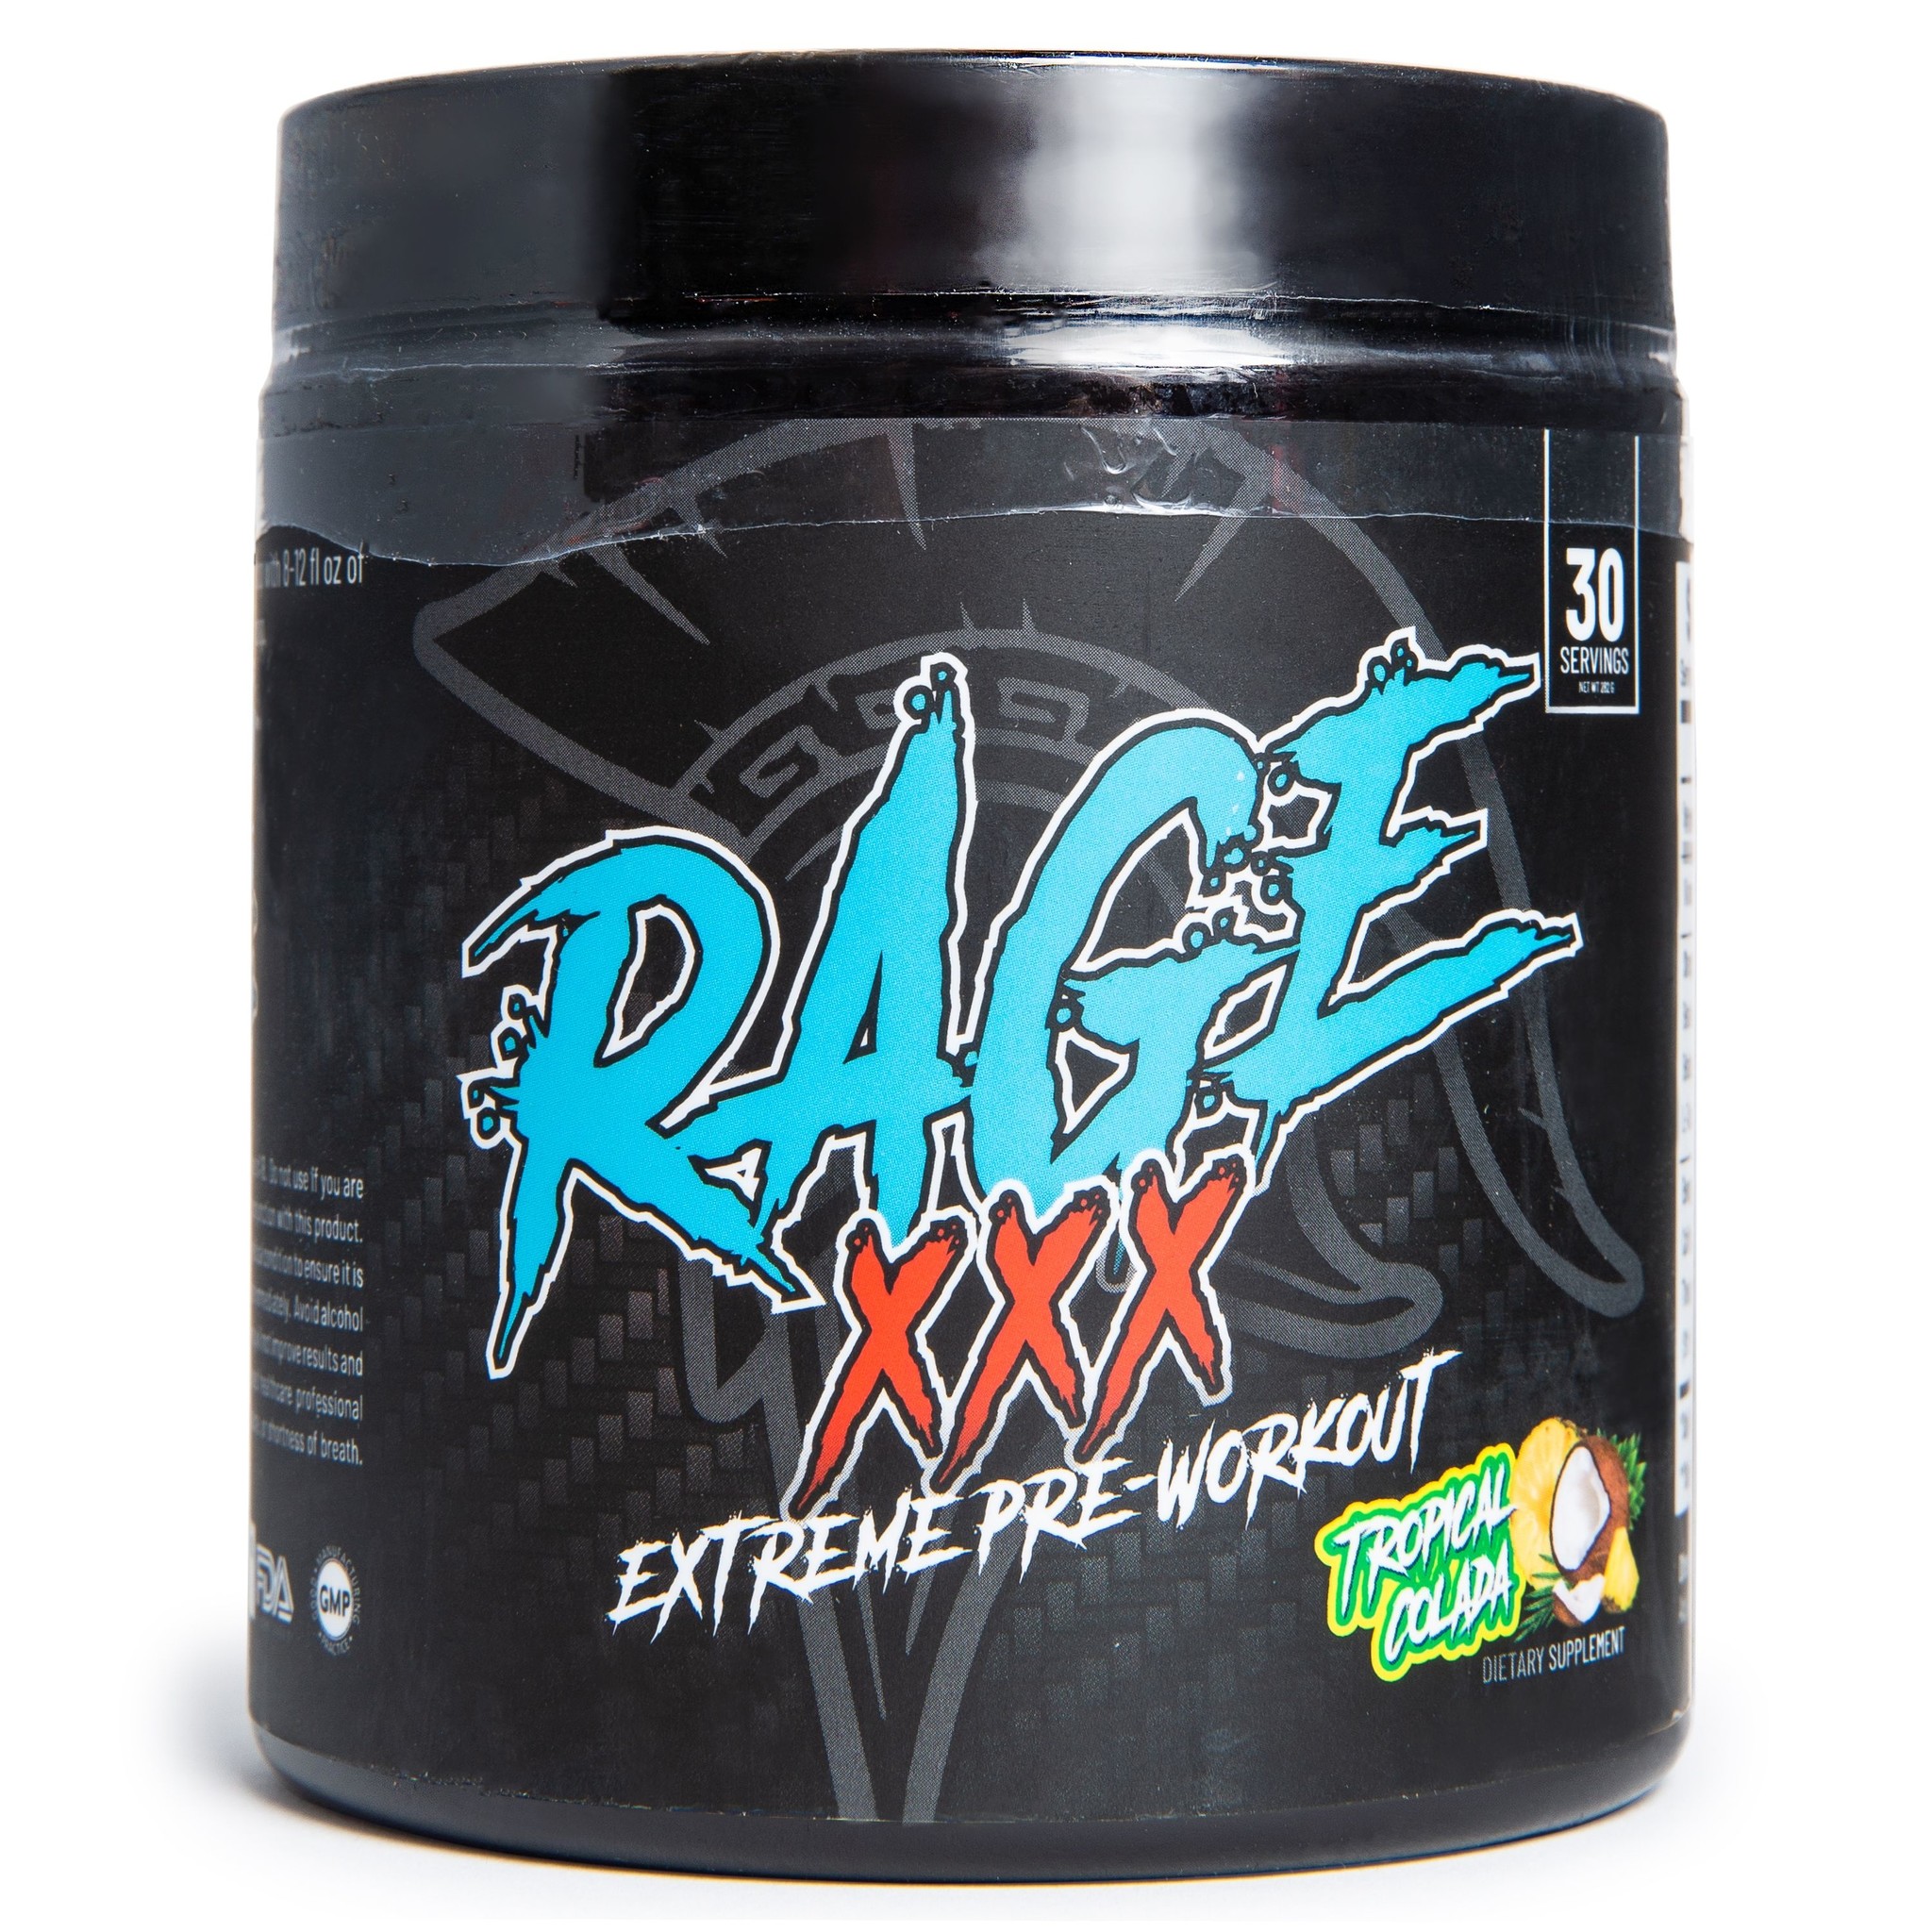 Simple Dark rage pre workout for Gym